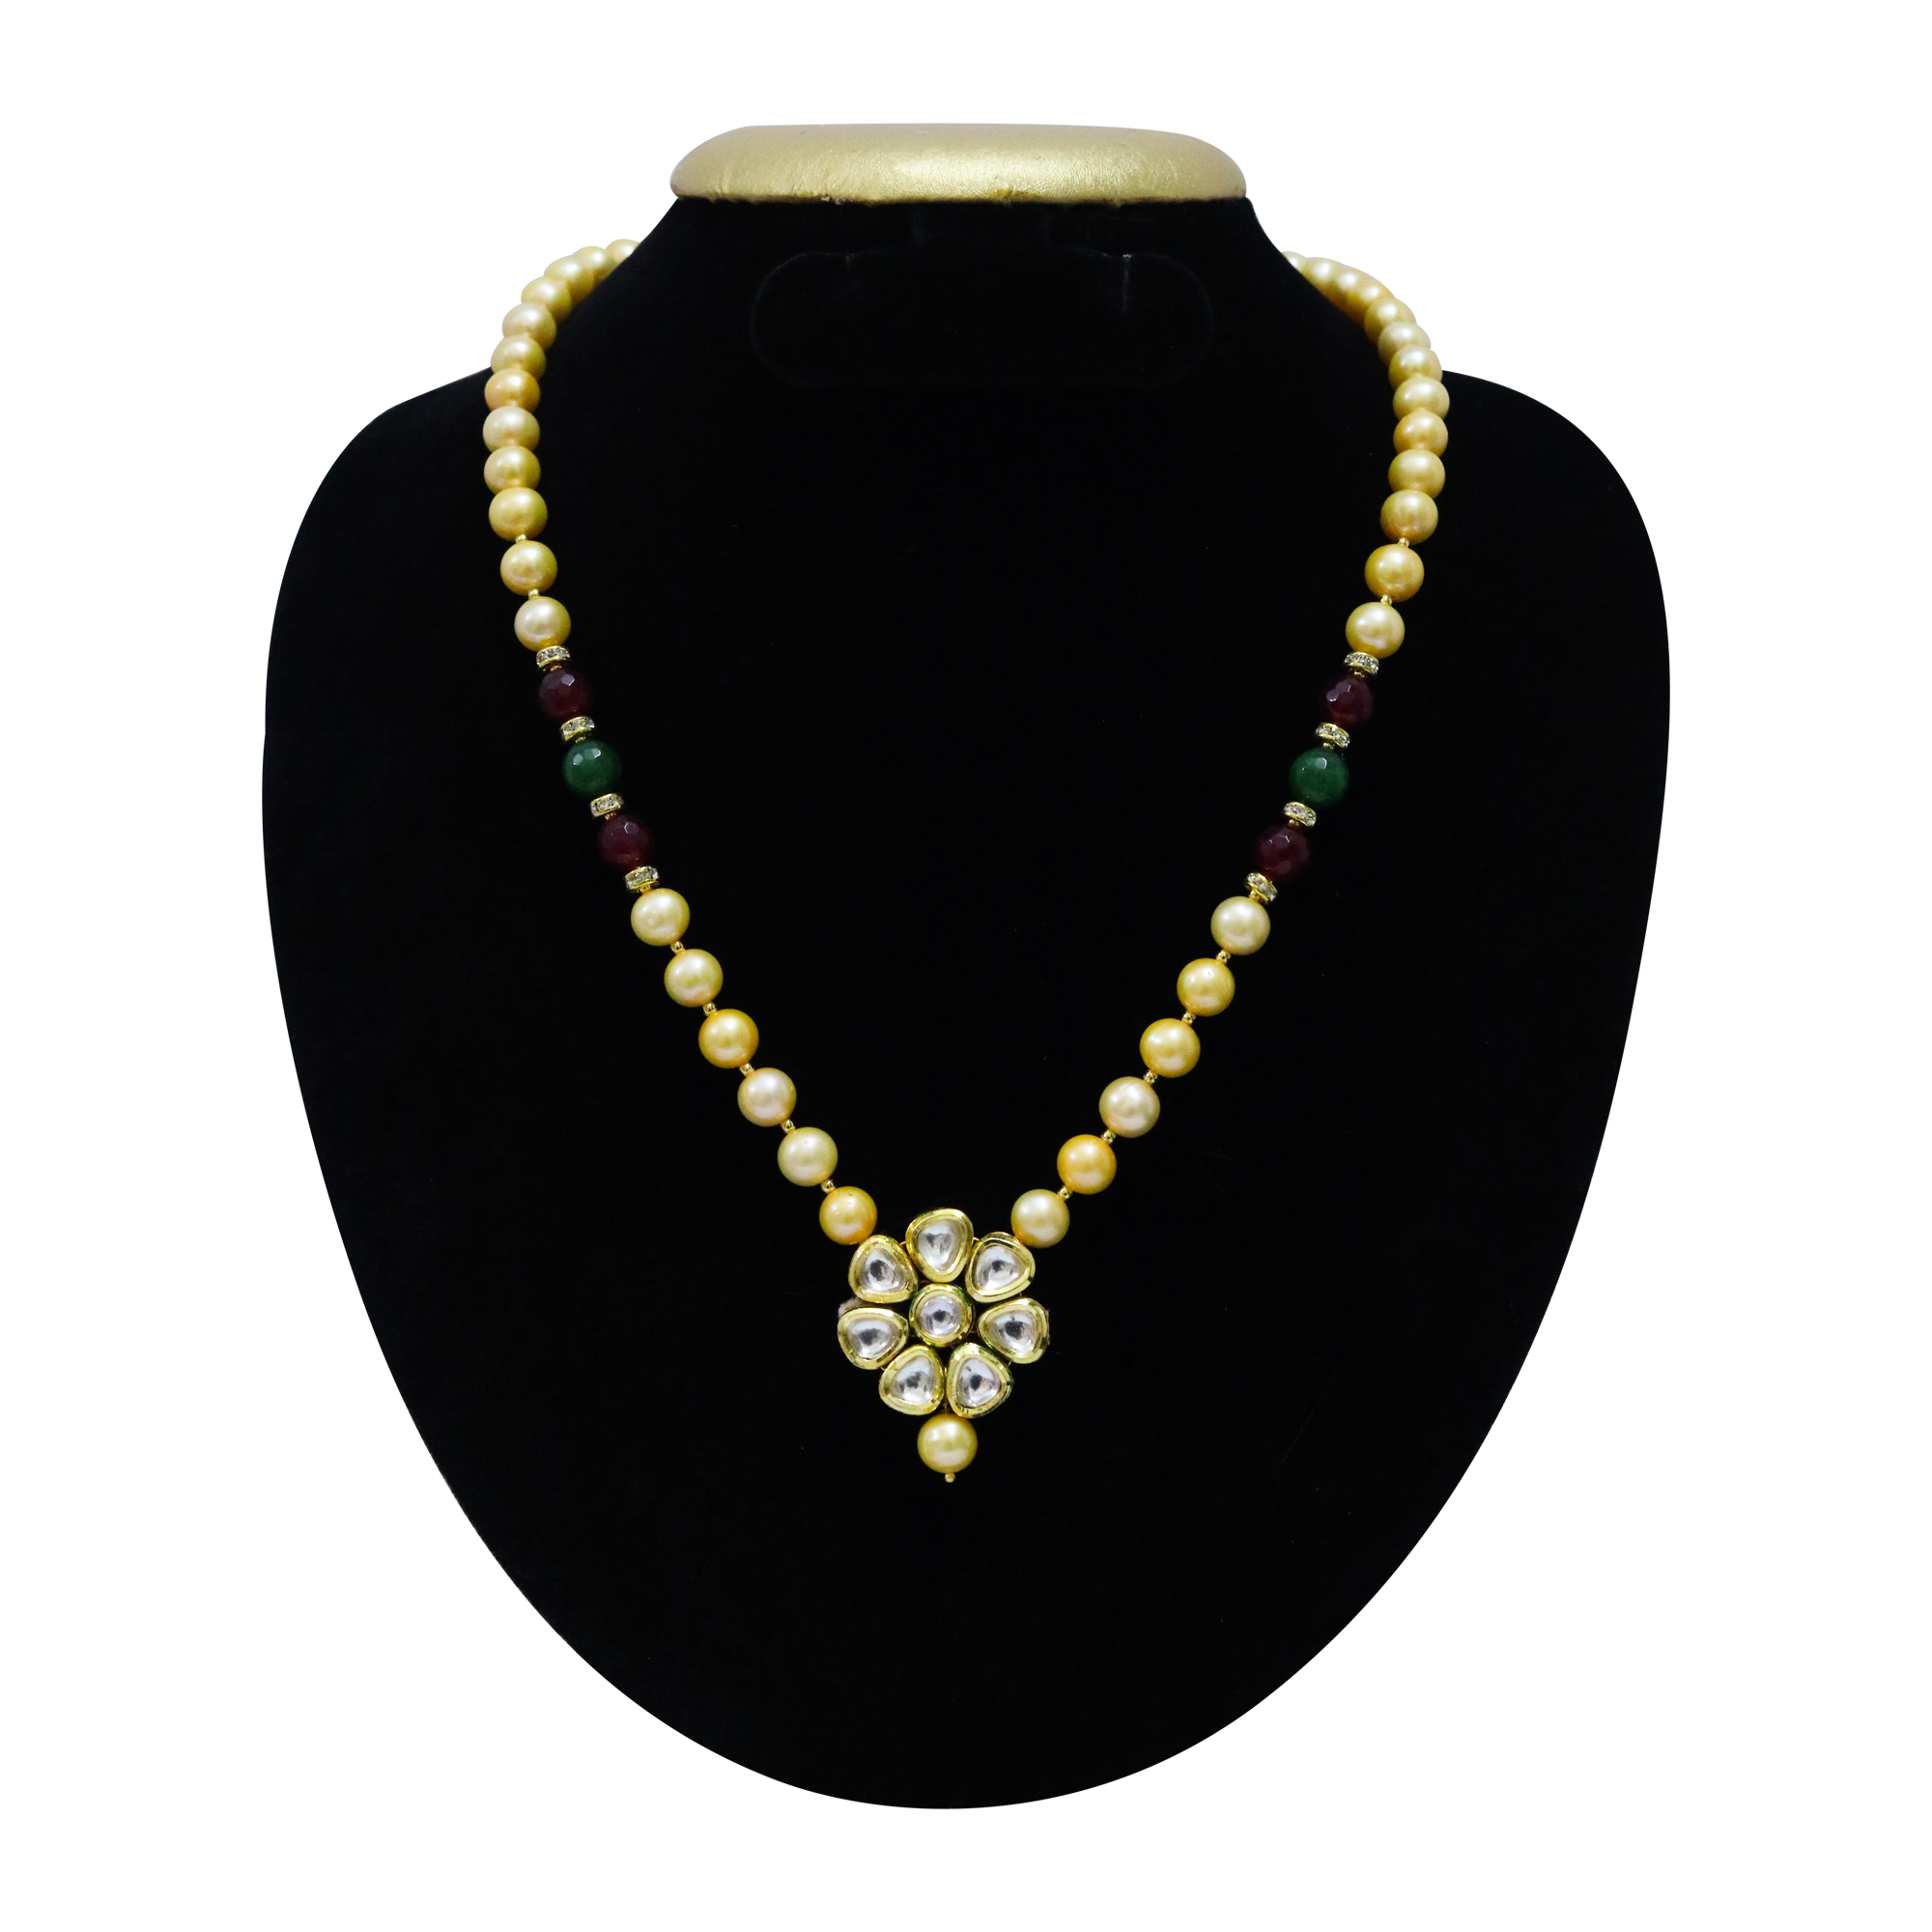 10 x 12mm Opera Golden Pearl Necklace | American Pearl